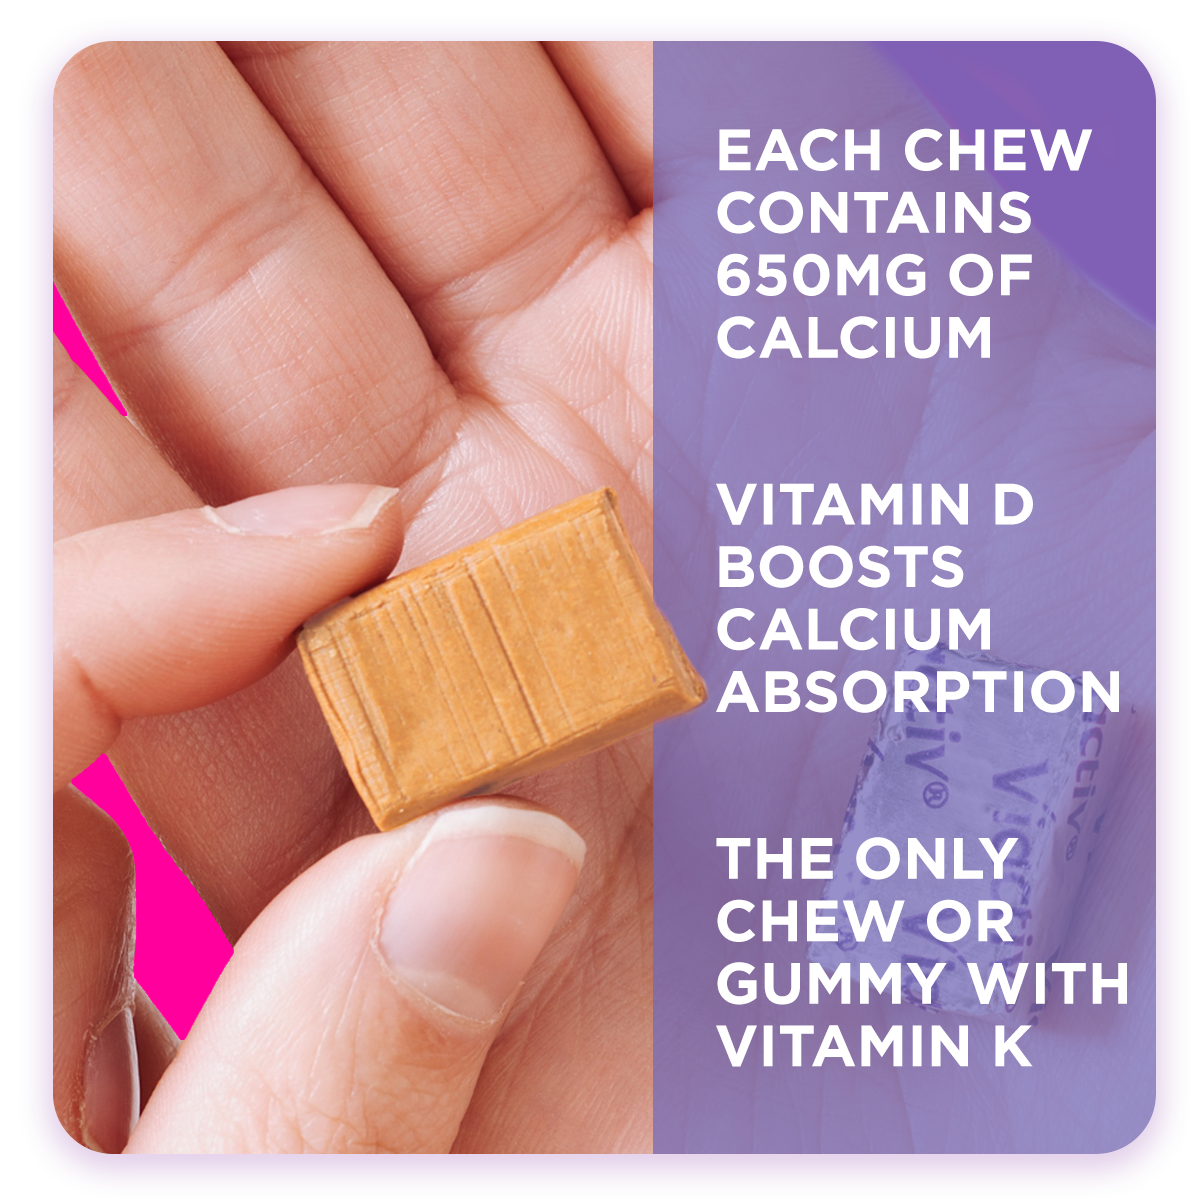 Hand holding Caramel Calcium chew showing that each chew contains 650mg of Calcium, Vitamin D for Calcium Absorption, and that its the only chew with Vitamin K